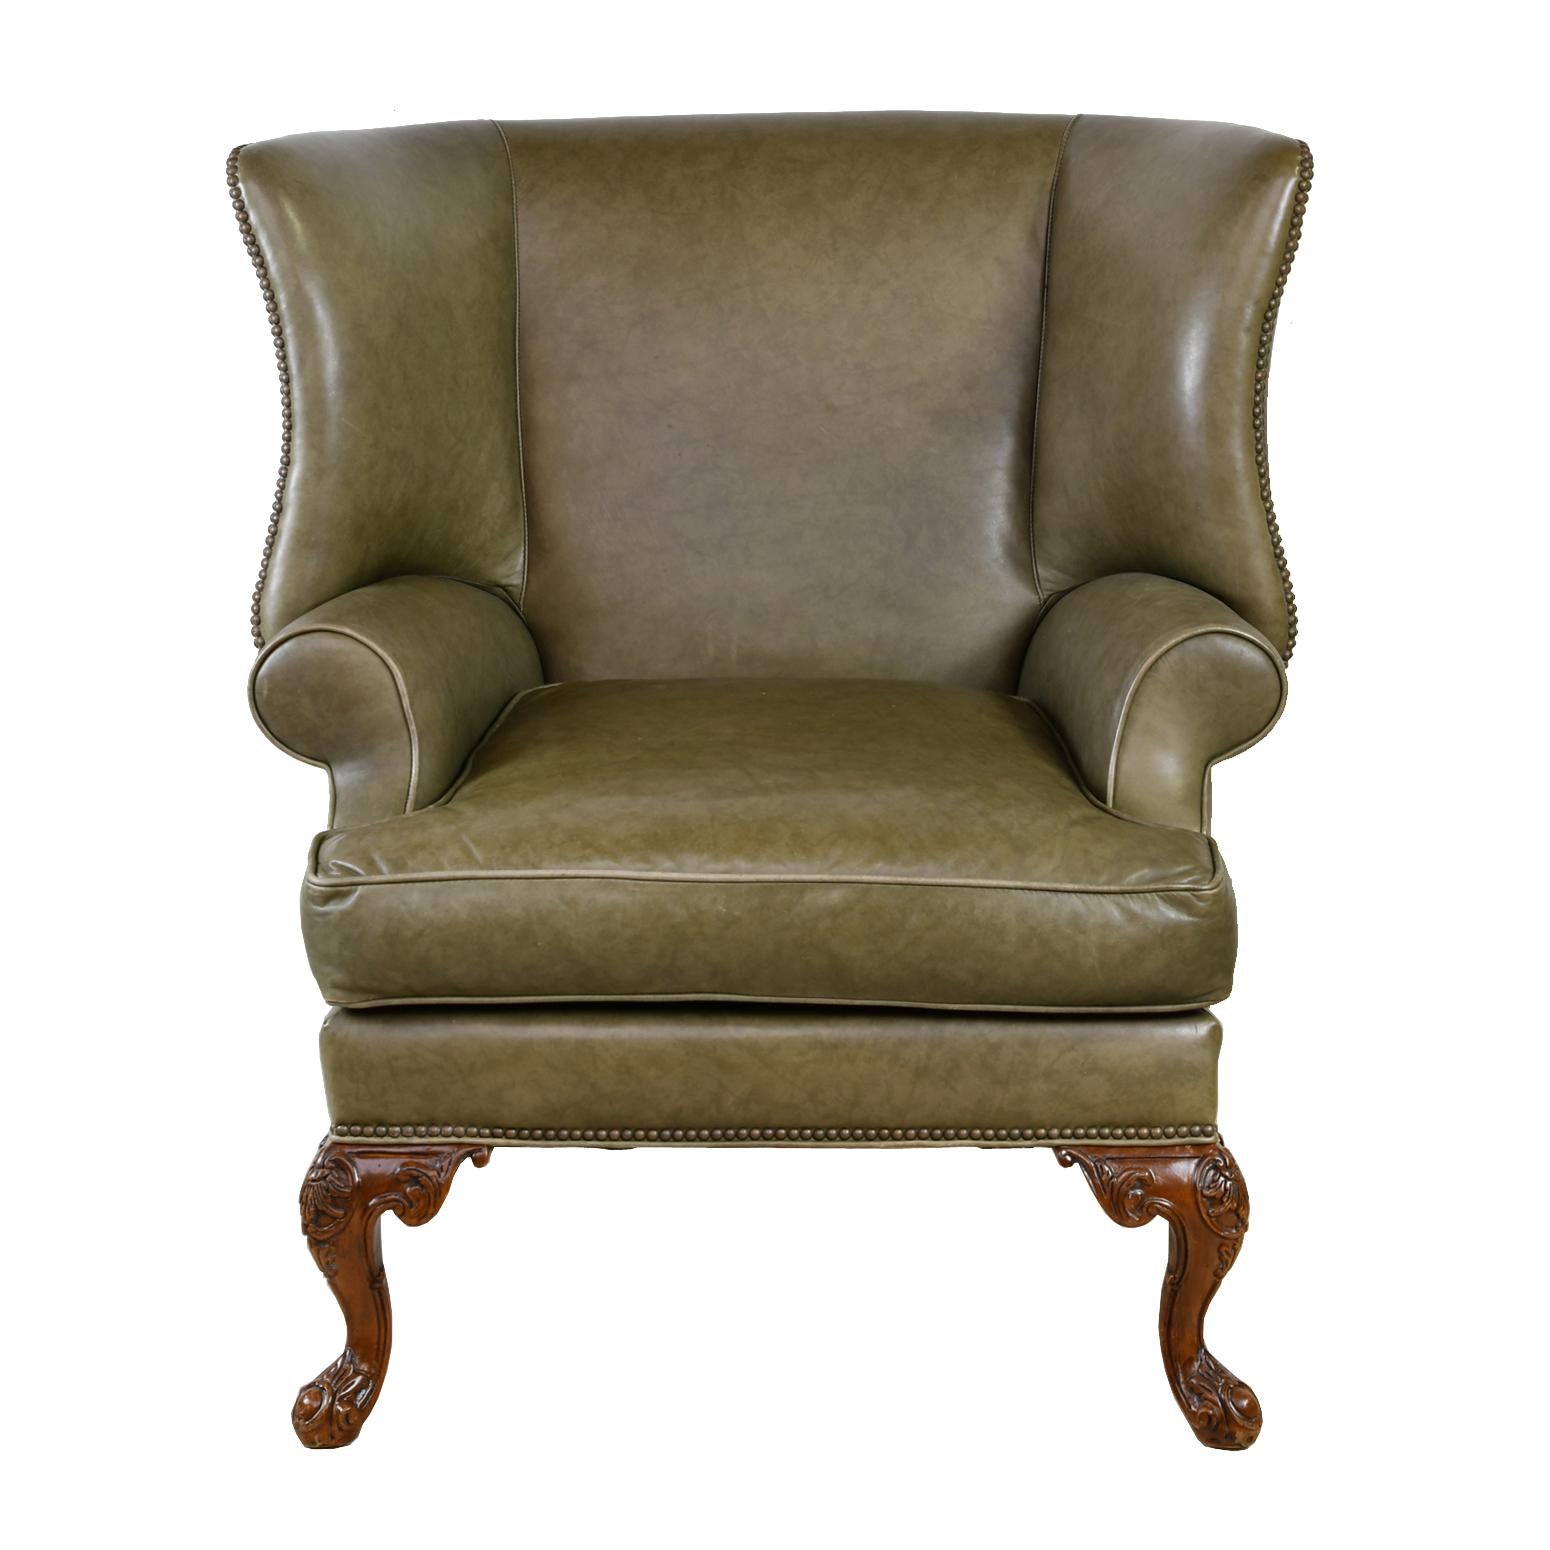 A large and well-proportioned wingback armchair beautifully-upholstered in a high quality sage-green colored leather with decorative nailheads, and resting on carved cabriole feet with splayed back legs. Springform cushion offers added comfort,